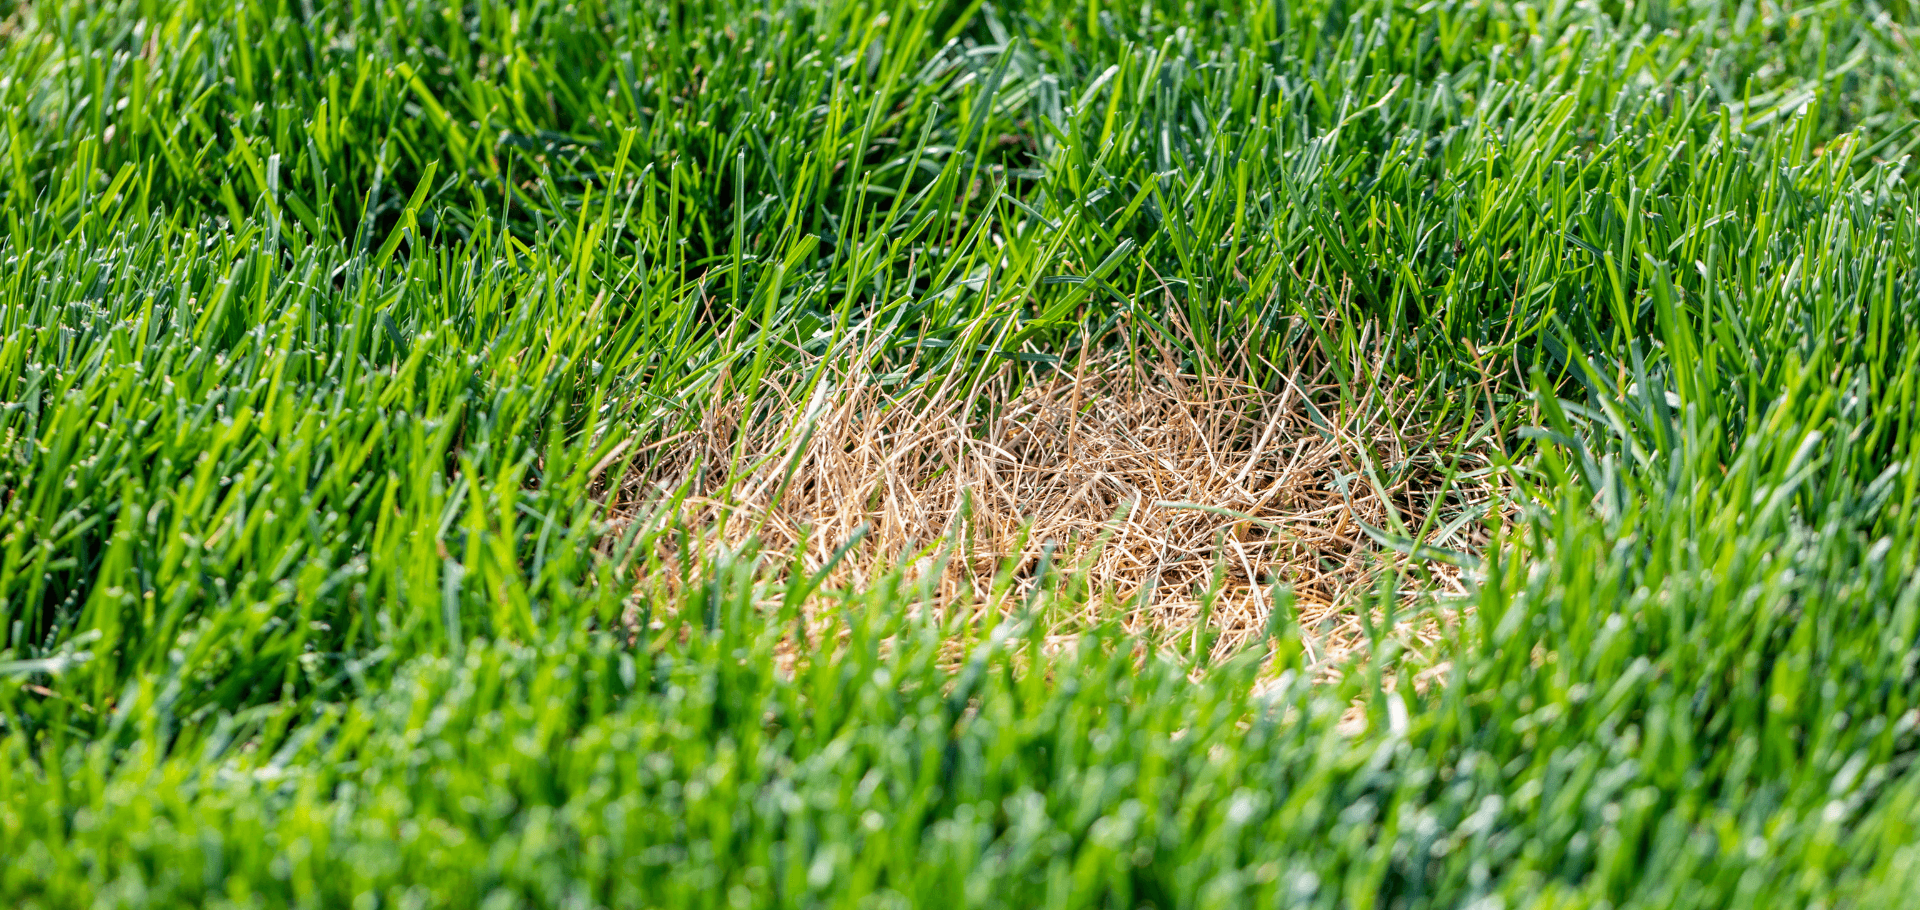 Dead And Dormant Grass: What’s The Difference?